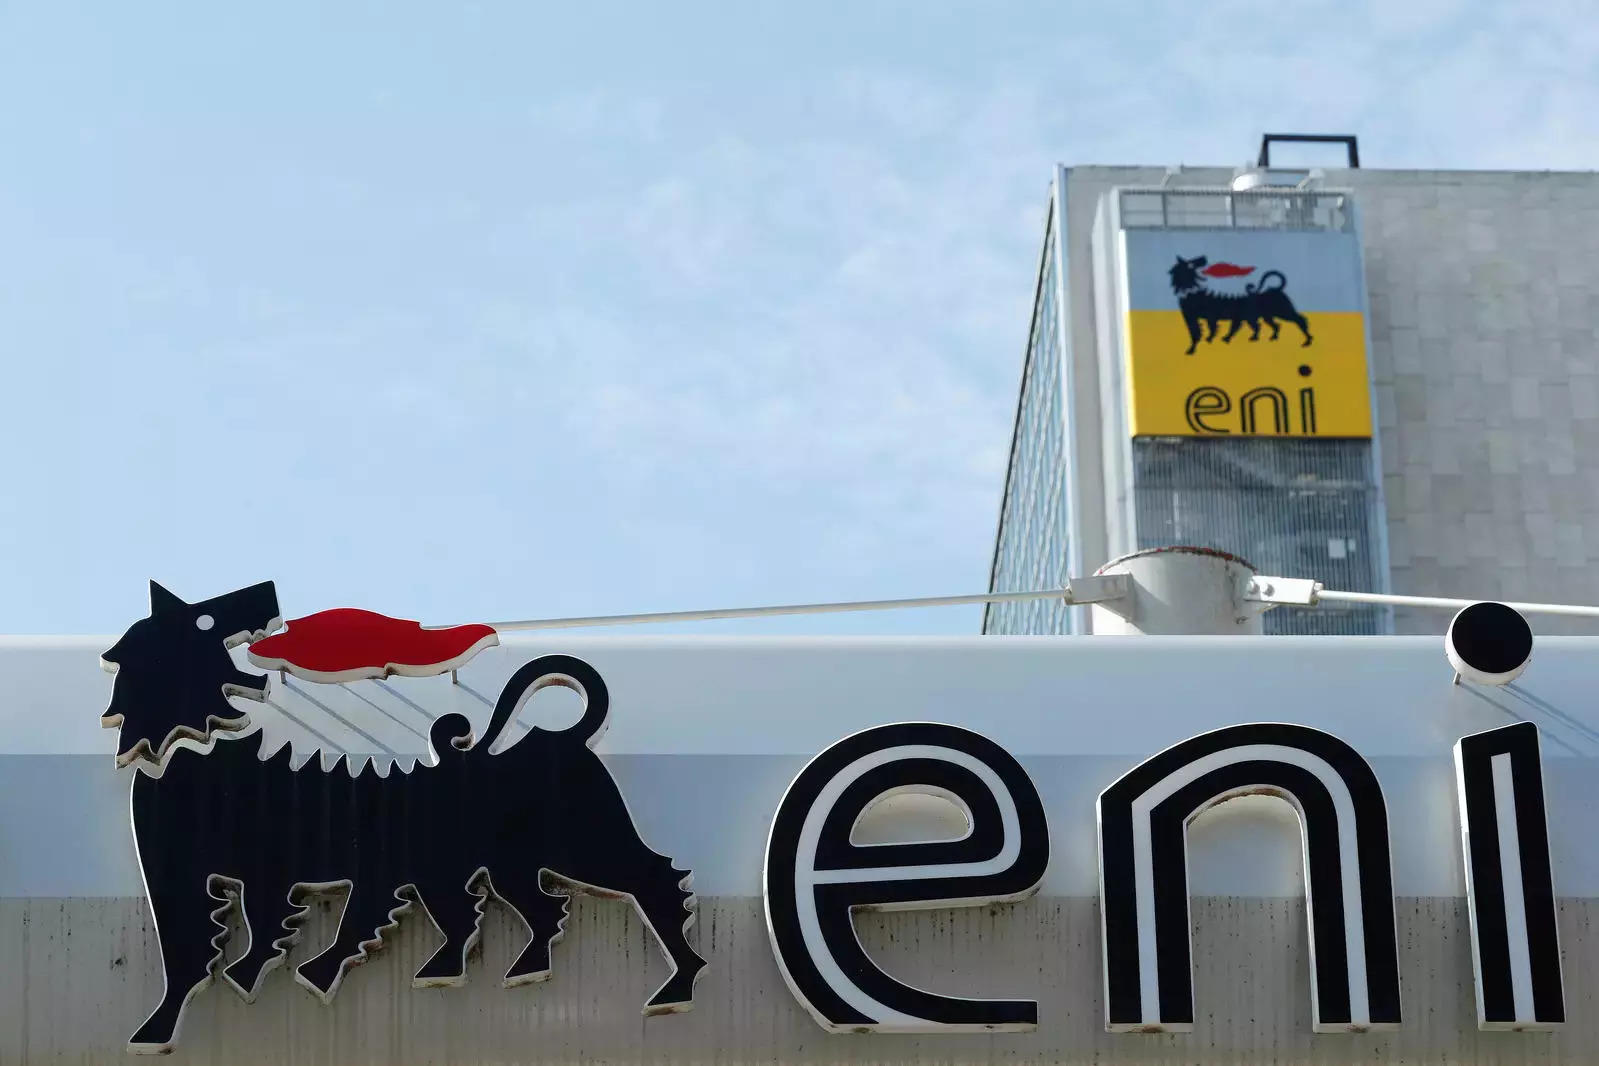  Eni is investing in carbon capture and storage businesses as part of its drive to be carbon neutral by 2050. 